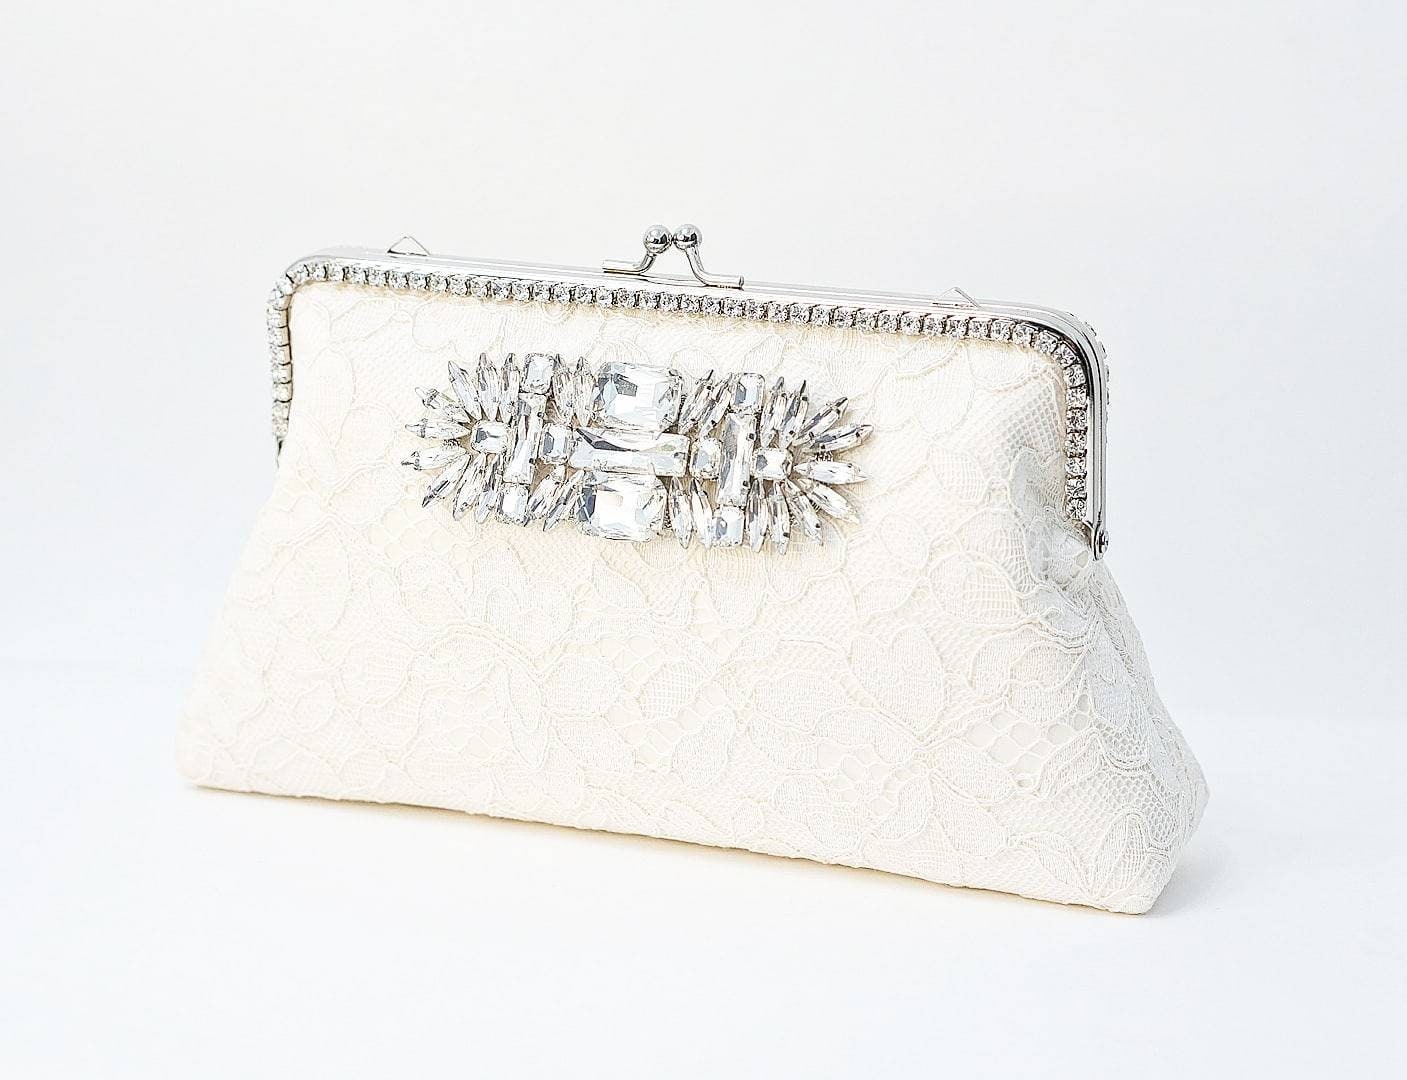 White/ivory pearl women's handbags evening Day clutches small handbag bride  bridesmaids party bag with handle Chain Shoulder Bag